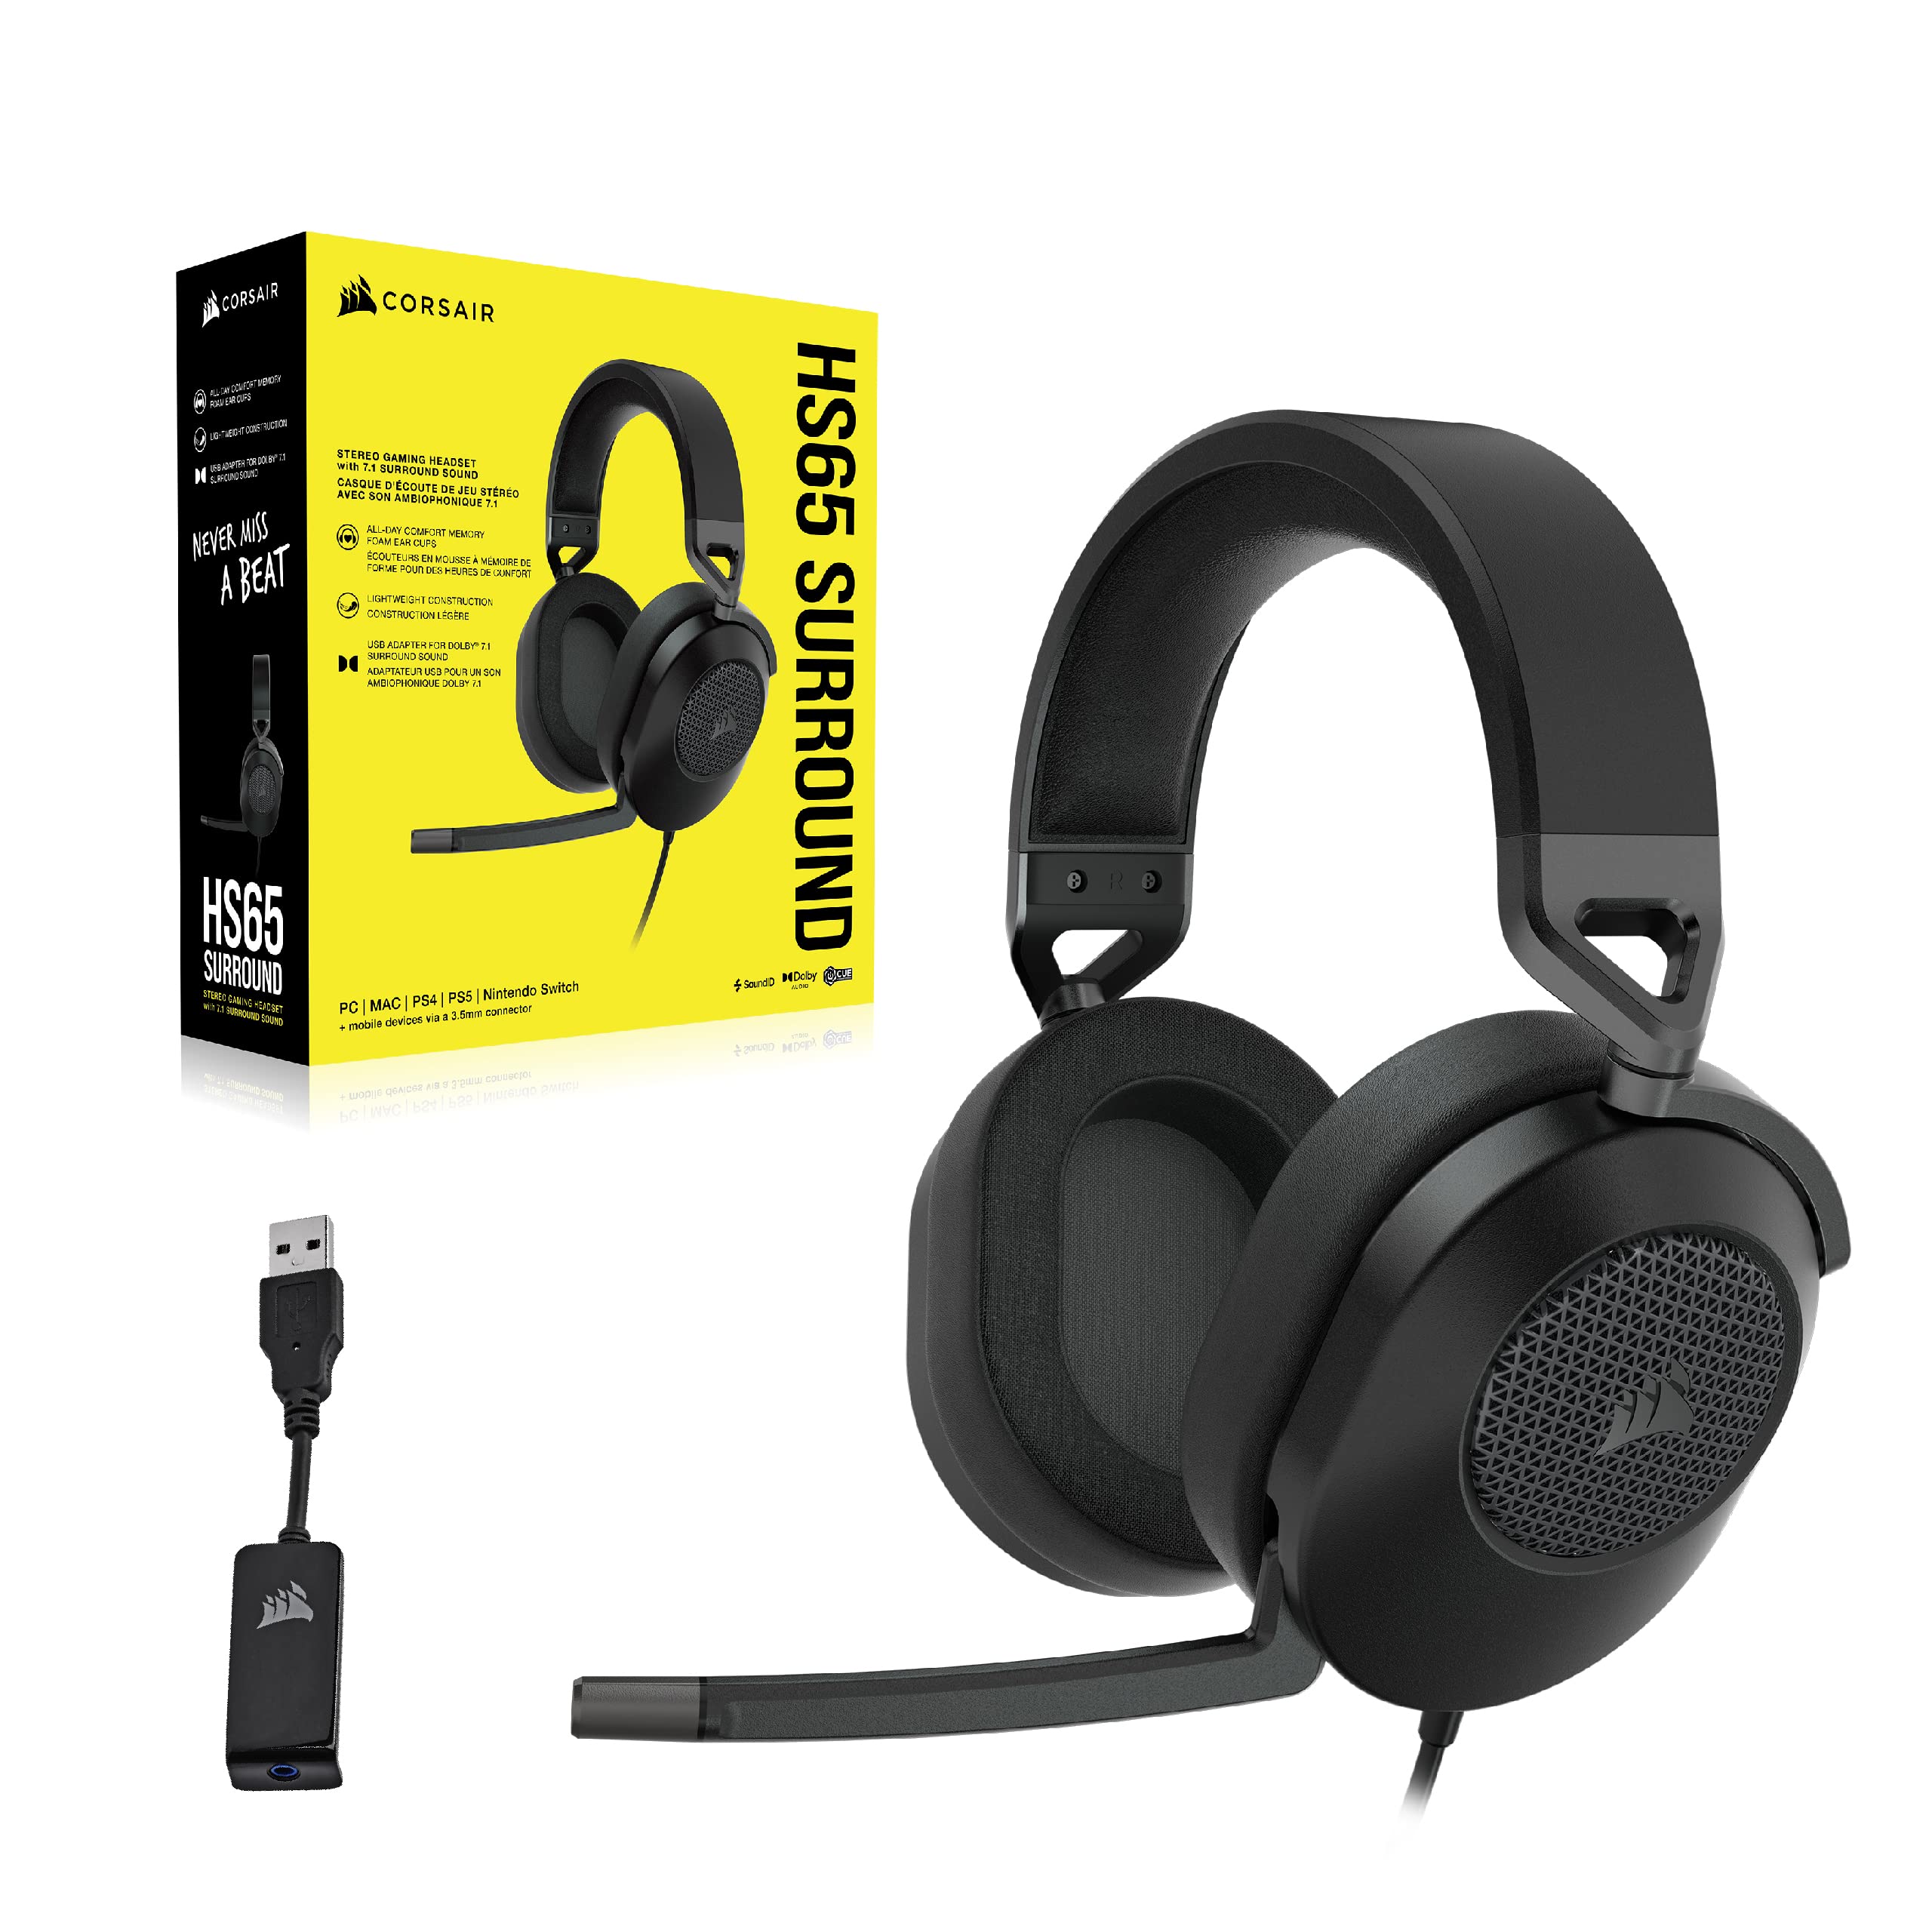 Corsair HS65 SURROUND Gaming Headset (Leatherette Memory Foam Ear Pads, Dolby Audio 7.1 Surround Sound on PC and Mac, SonarWorks SoundID Technology, Multi-Platform Compatibility) Carbon